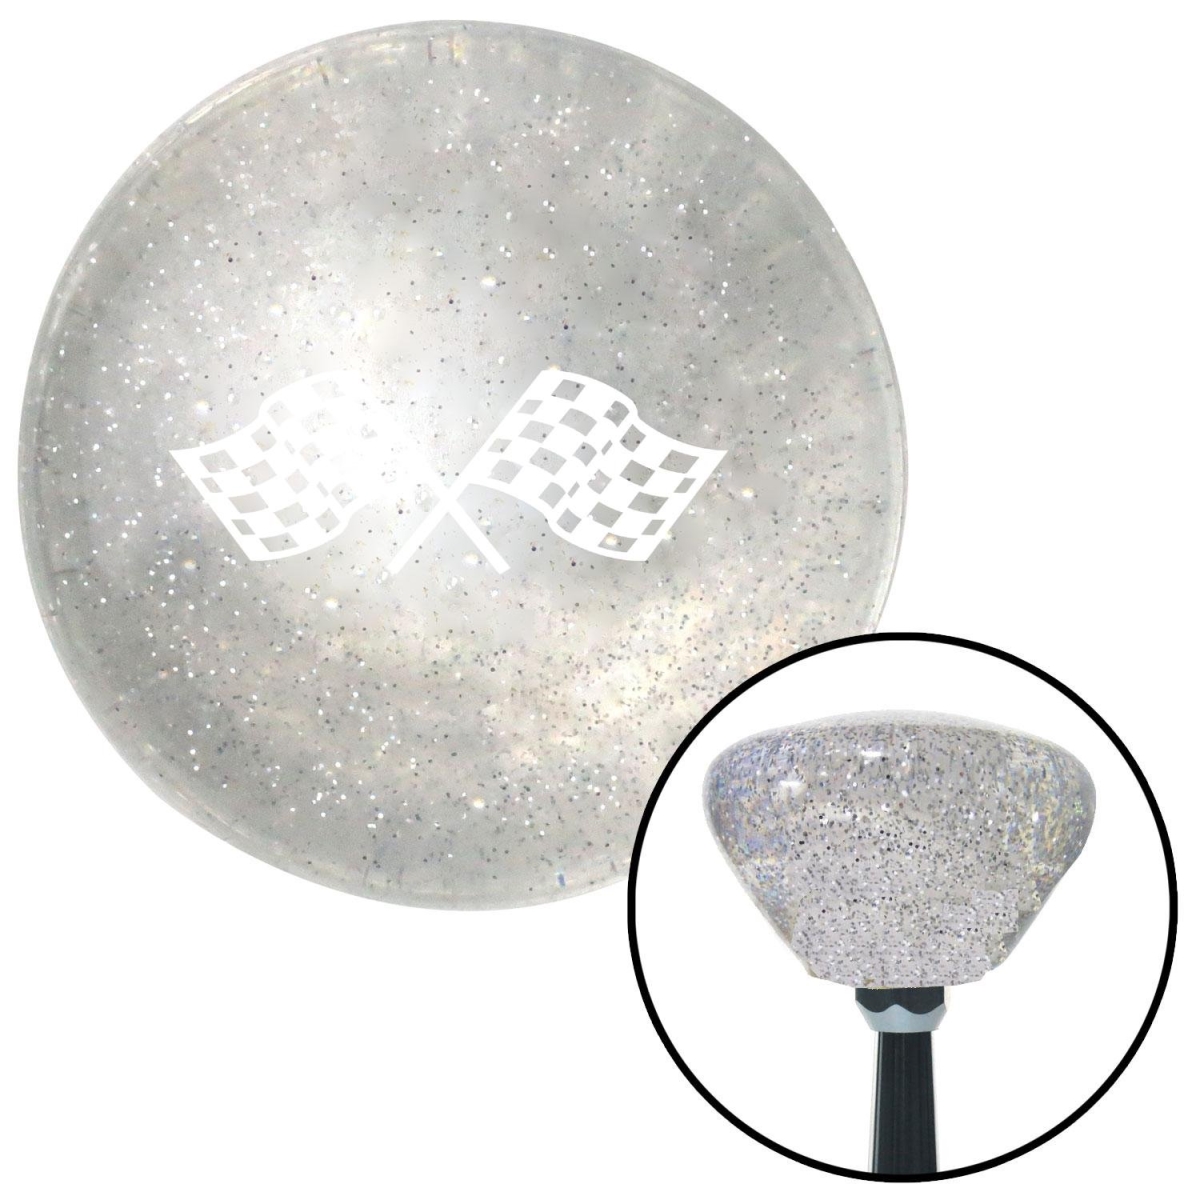 American Shifter 163608 White Dual Racing Flags Clear Retro Metal Flake Shift Knob with M16 x 1.5 Insert -  American Shifter Company